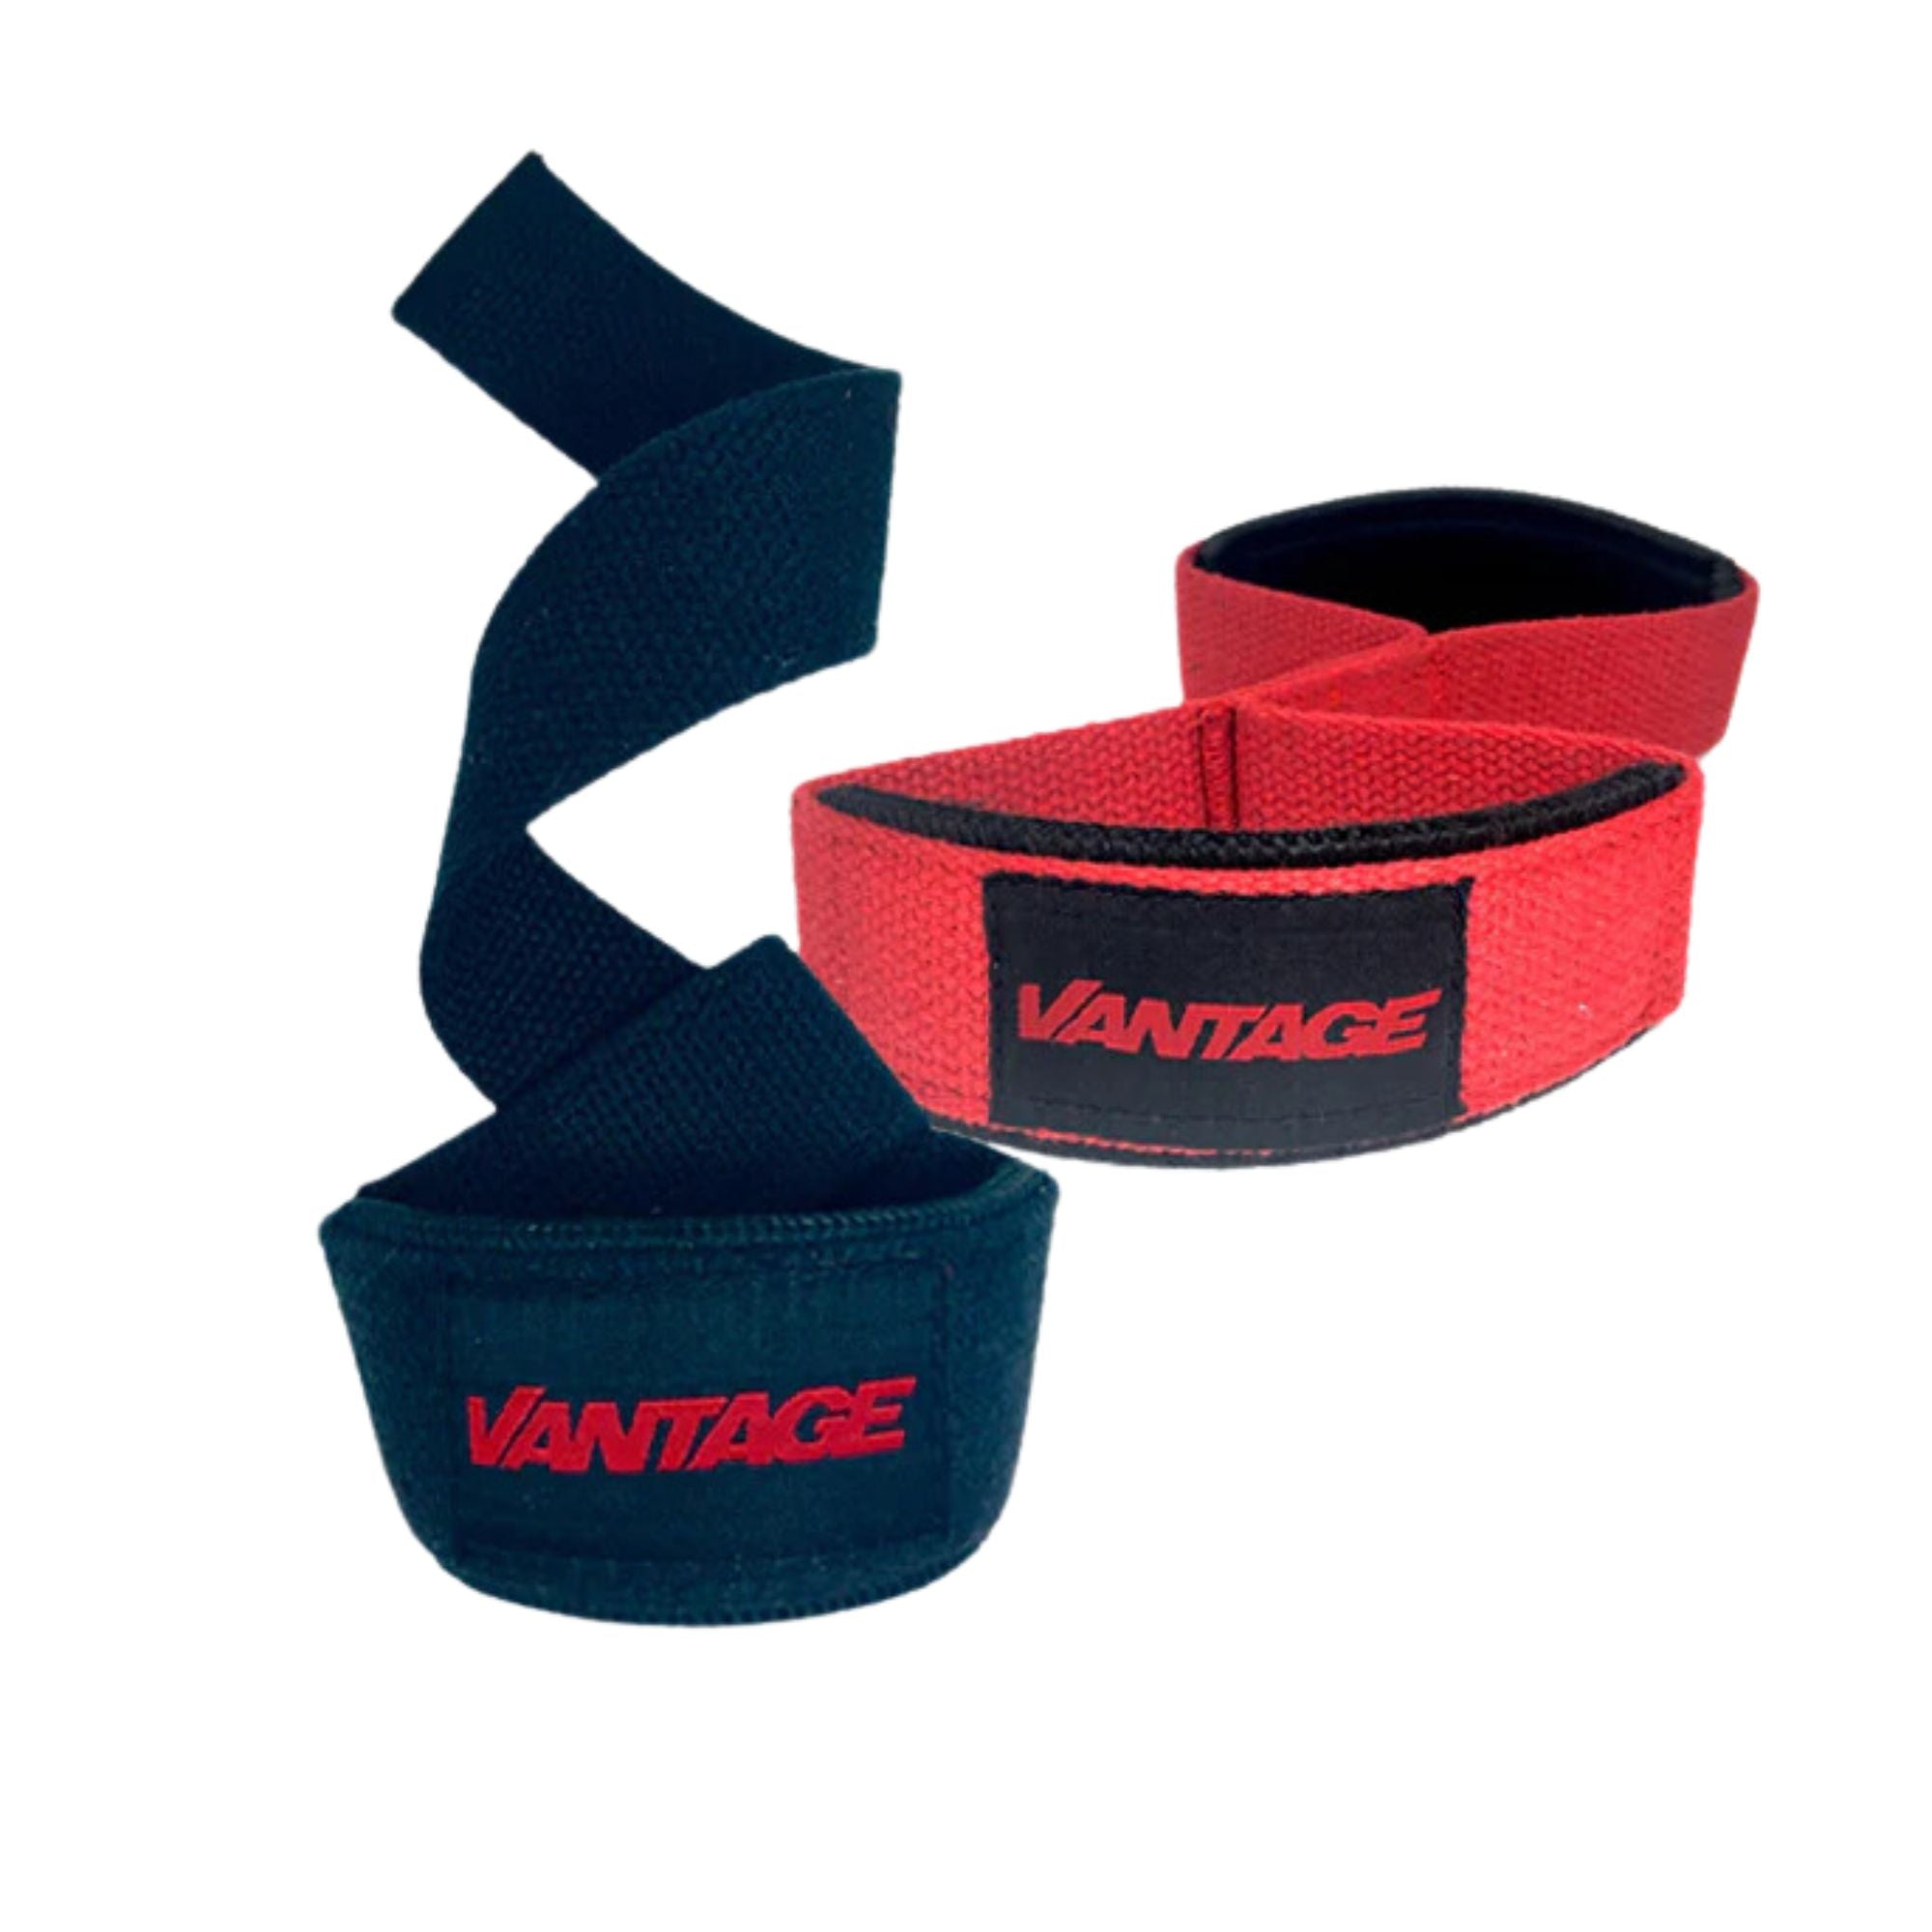 Vantage Strength Wrist Support with Wrist Loop Fitness Equipment